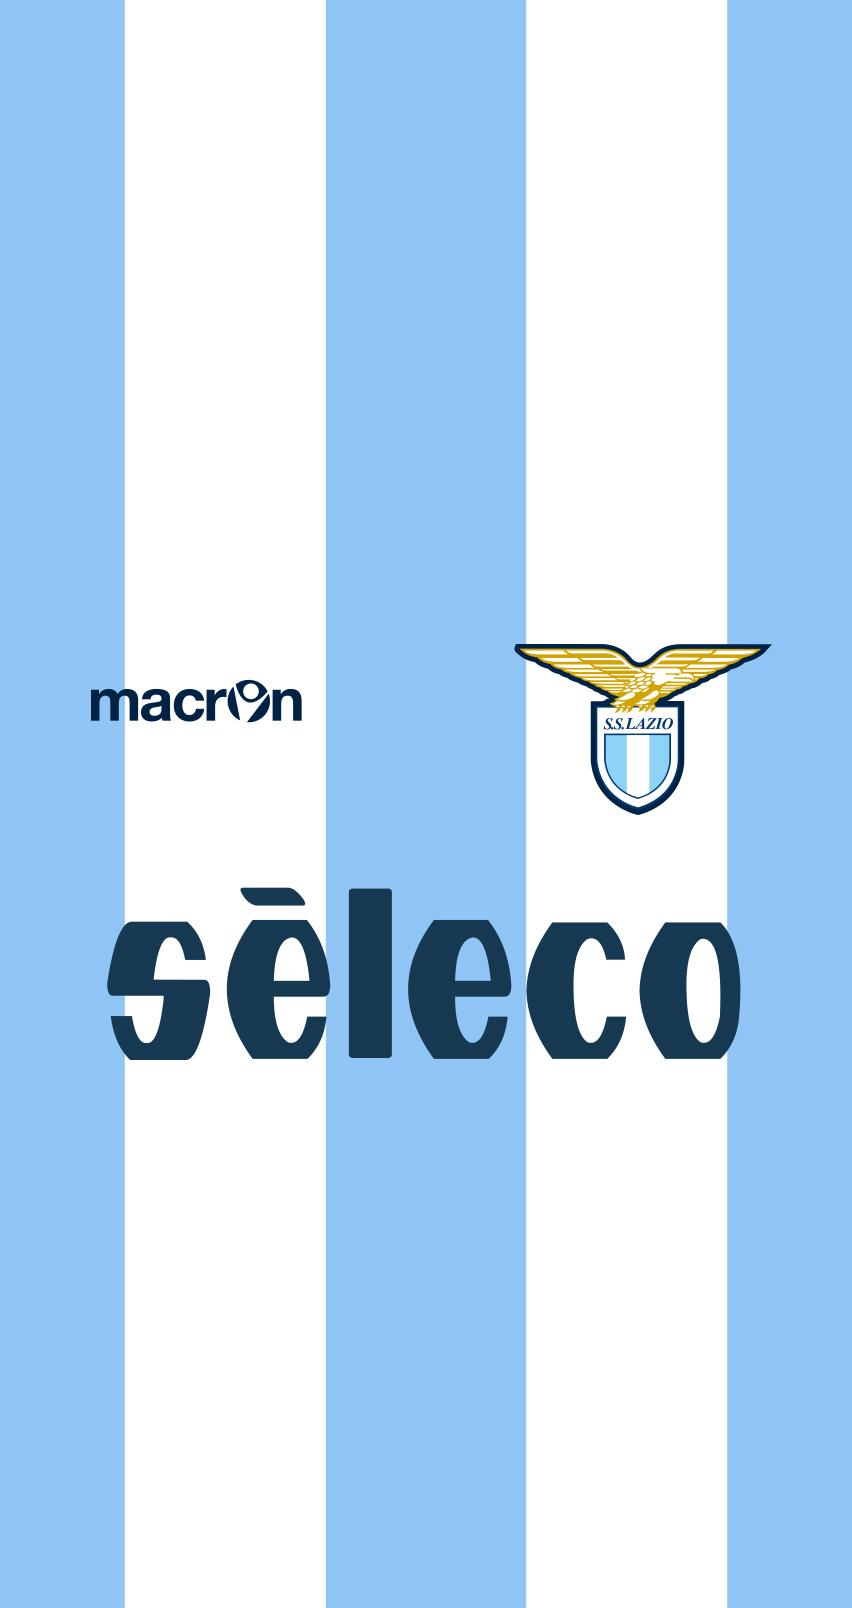 Lazio Wallpaper Iphone Wallpaper Wallpaper Sport Logo Football Lazio Serie A Hd 4k Quality Choose From Our Handpicked Custom Iphone Wallpaper Collection Wynell Heredia